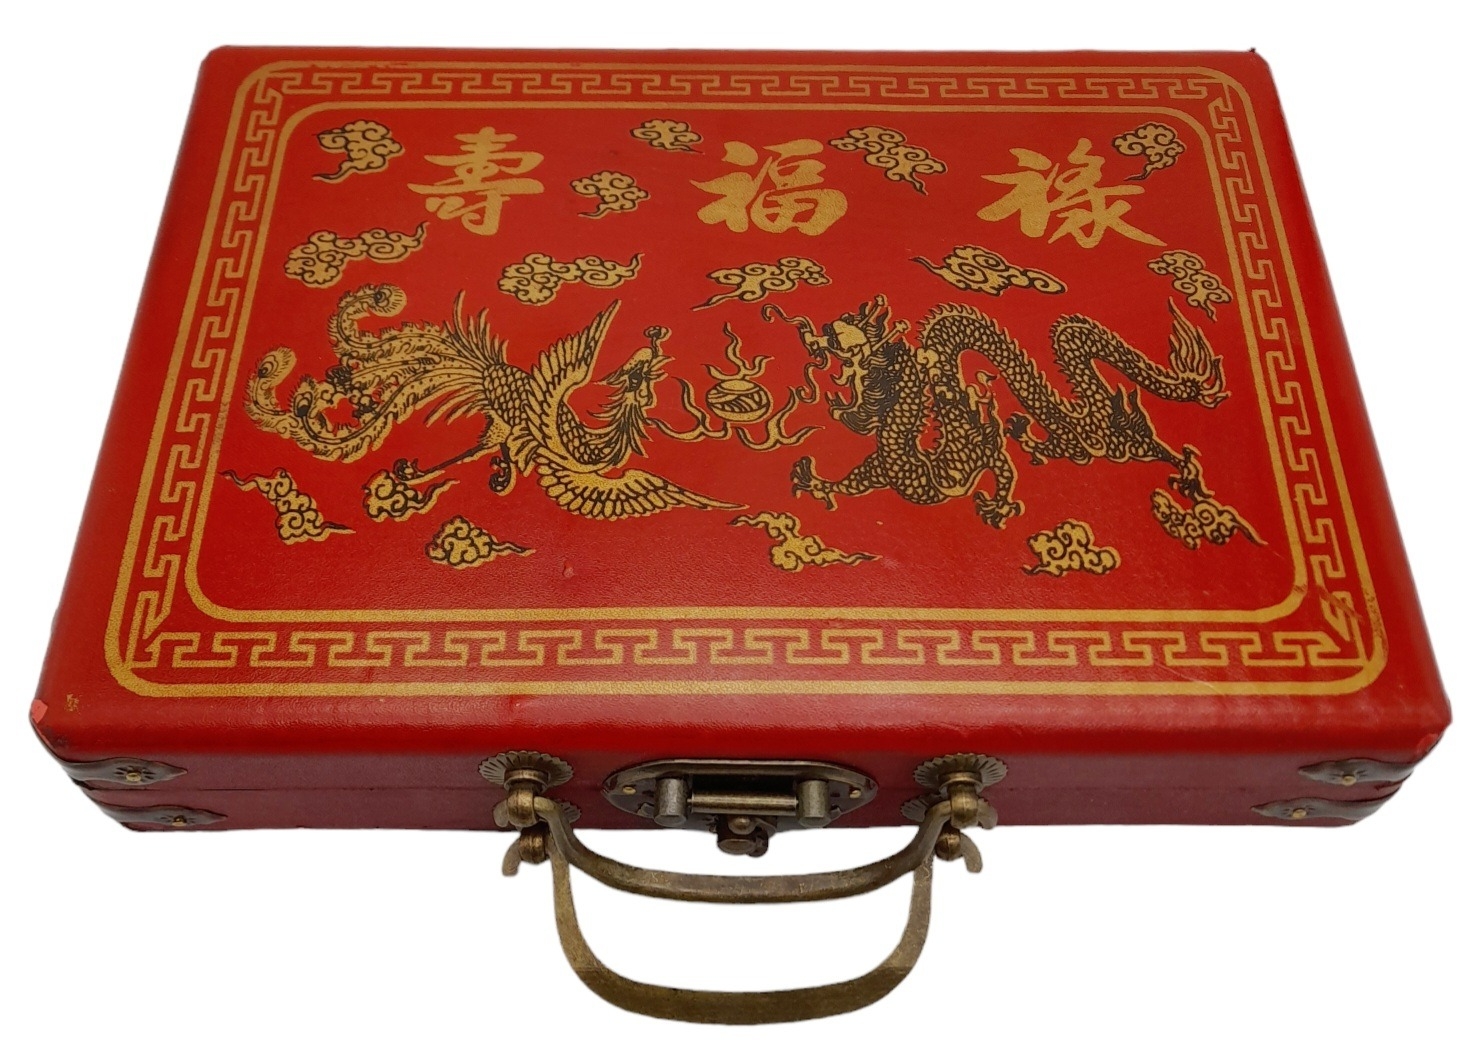 A Mah Jongg Chinese Dice Game in a Small Decorative Travelling Case. In excellent condition. - Image 2 of 7